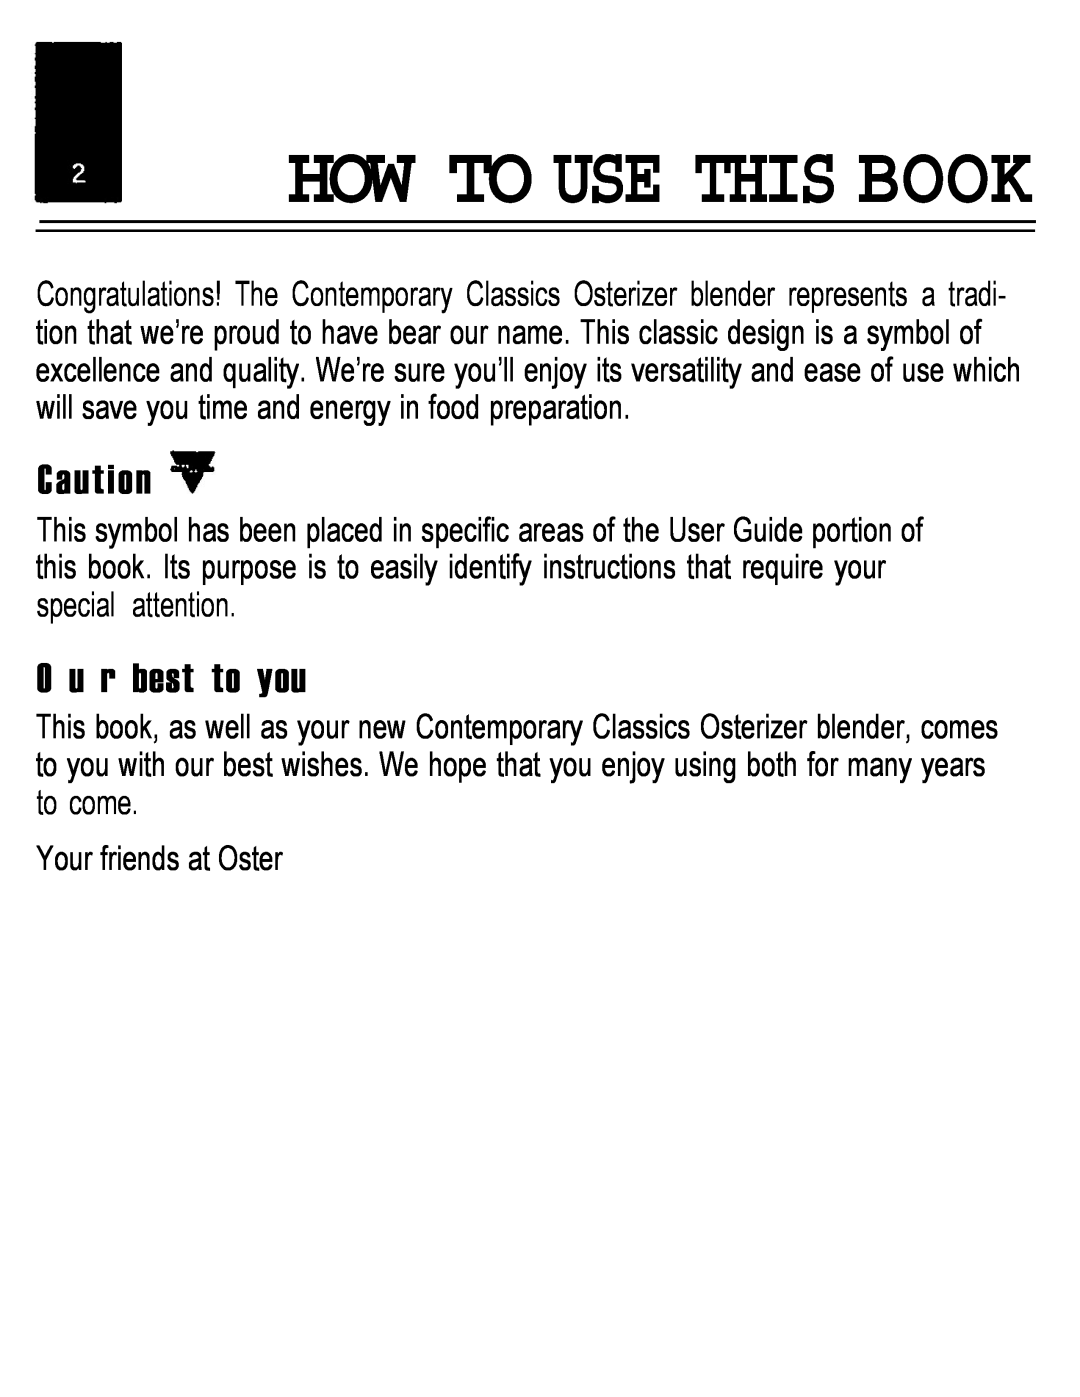 Oster IZER BLENDER/LIQUEFIER manual How To Use This Book, C a u t i o n, O u r best to you 